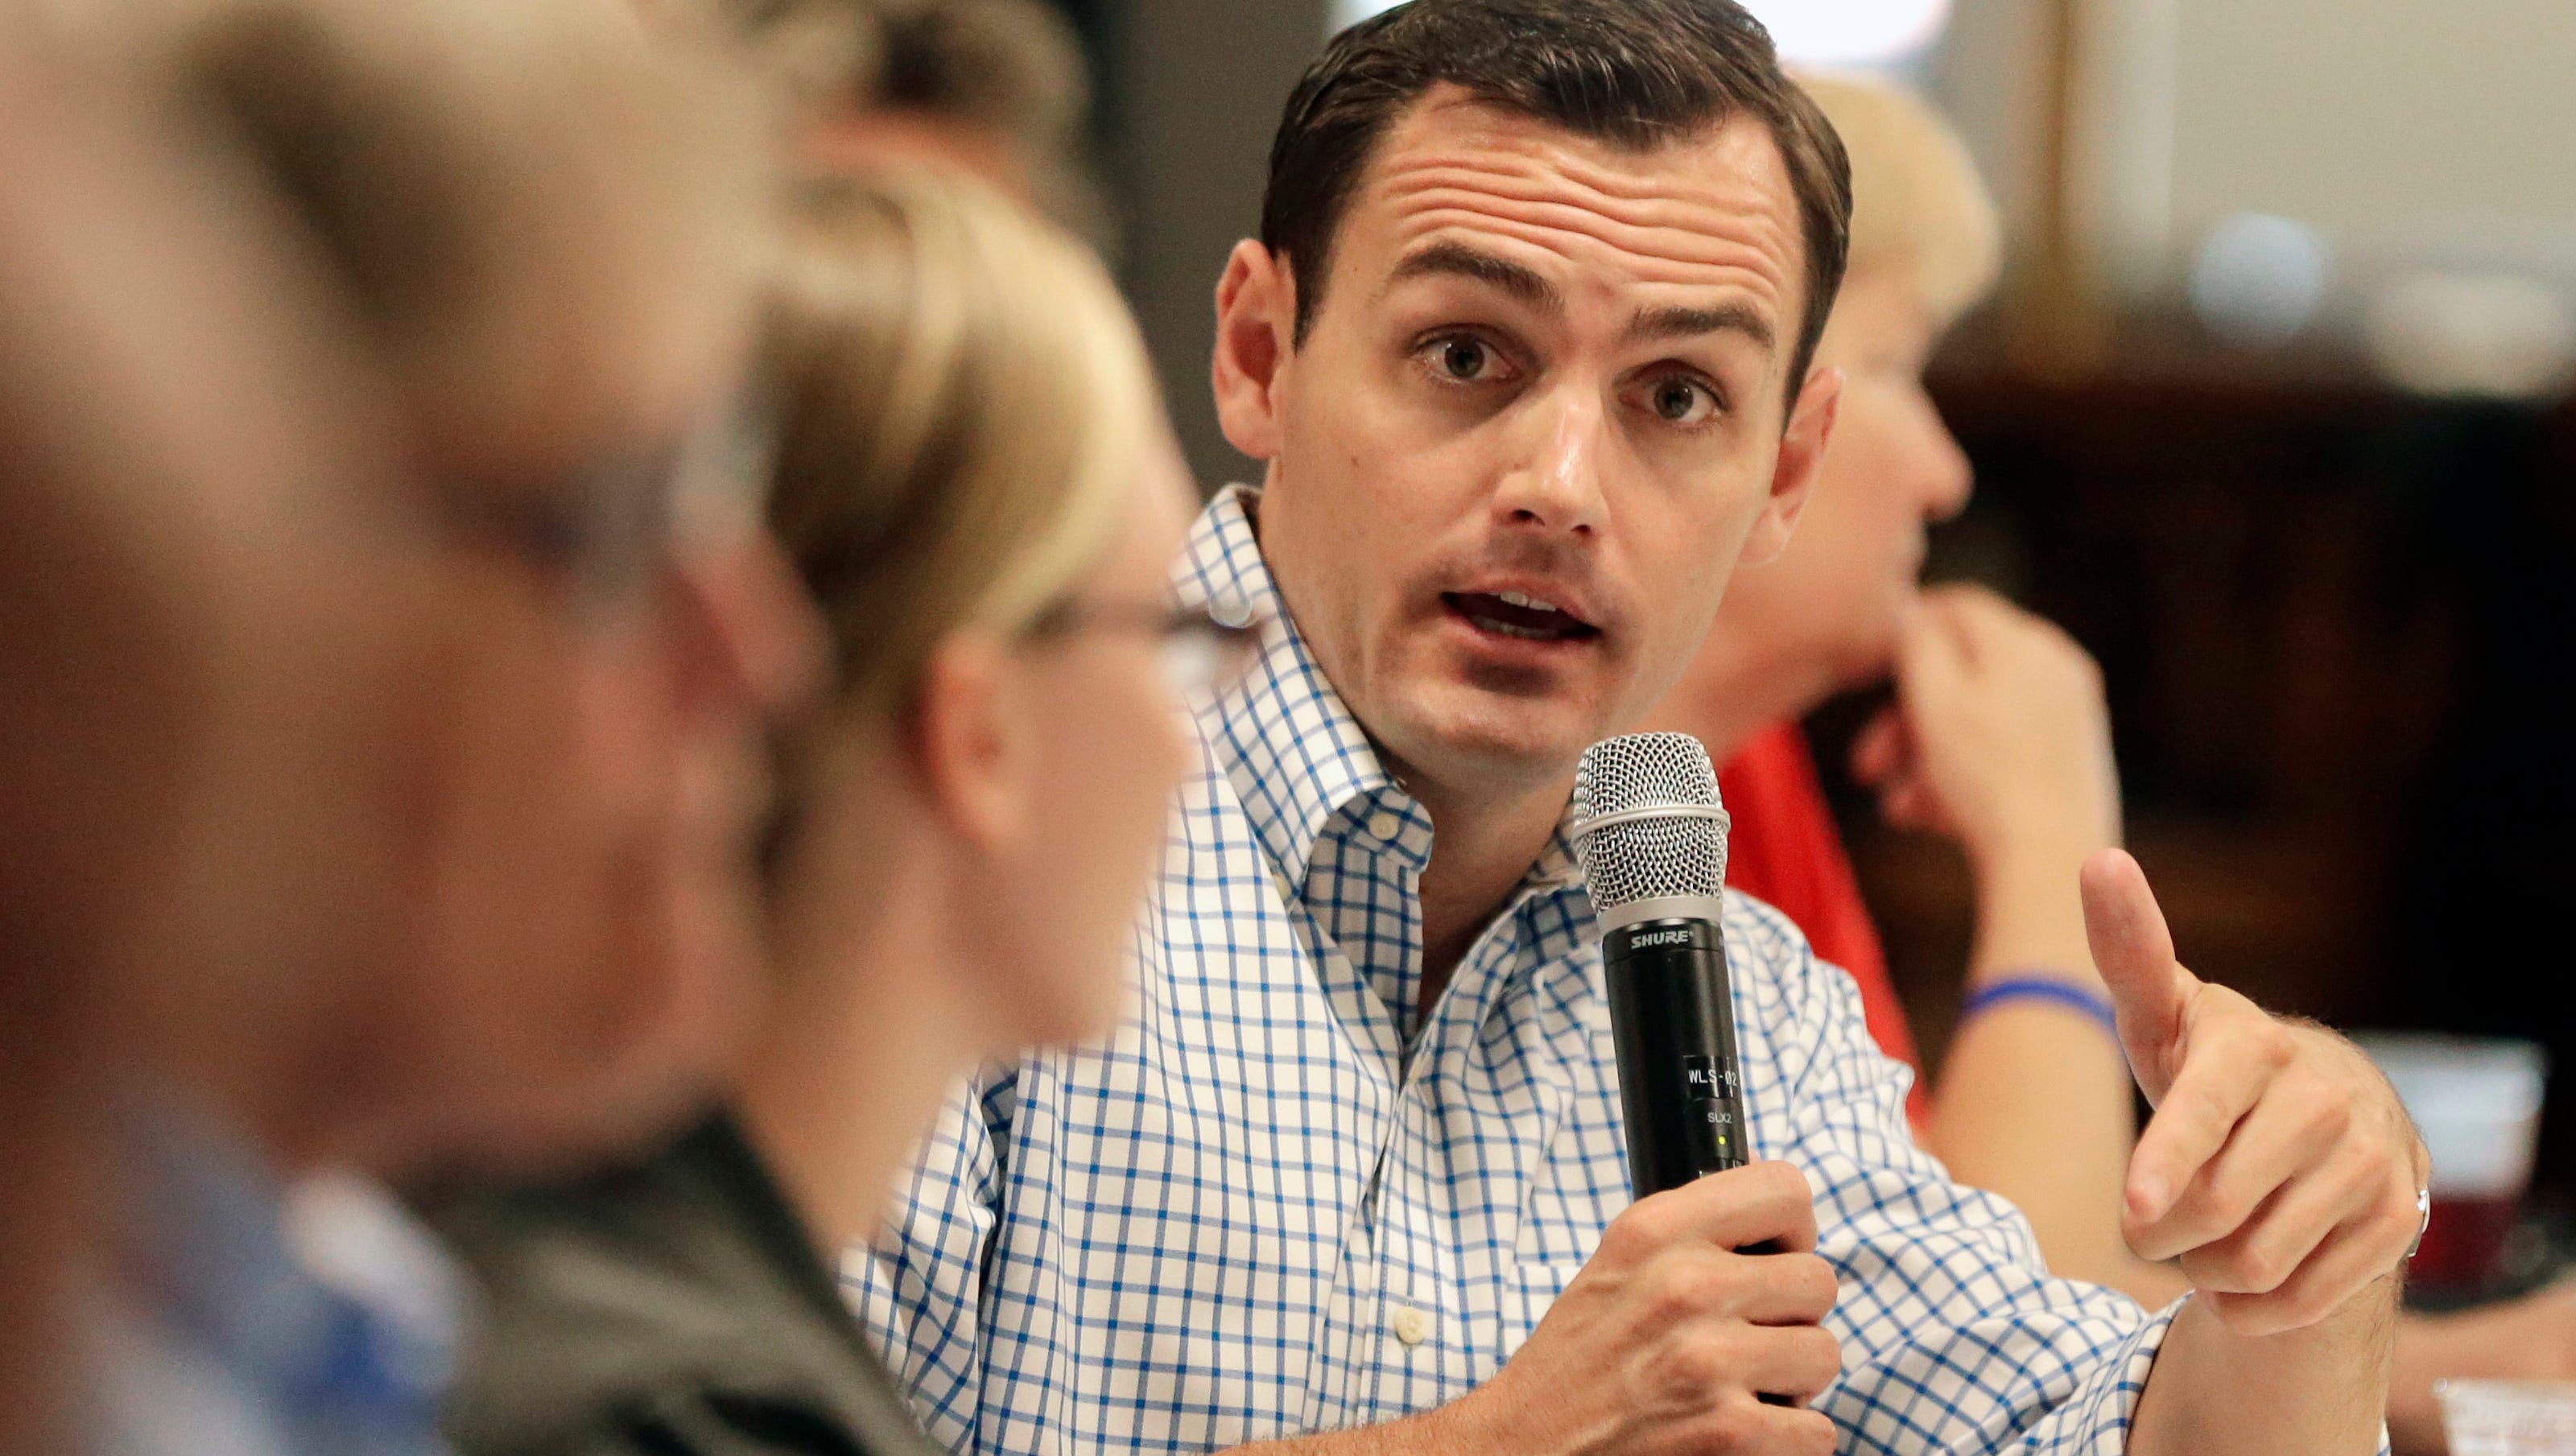 Mike Gallagher silent on overturning mask mandate as district worsens